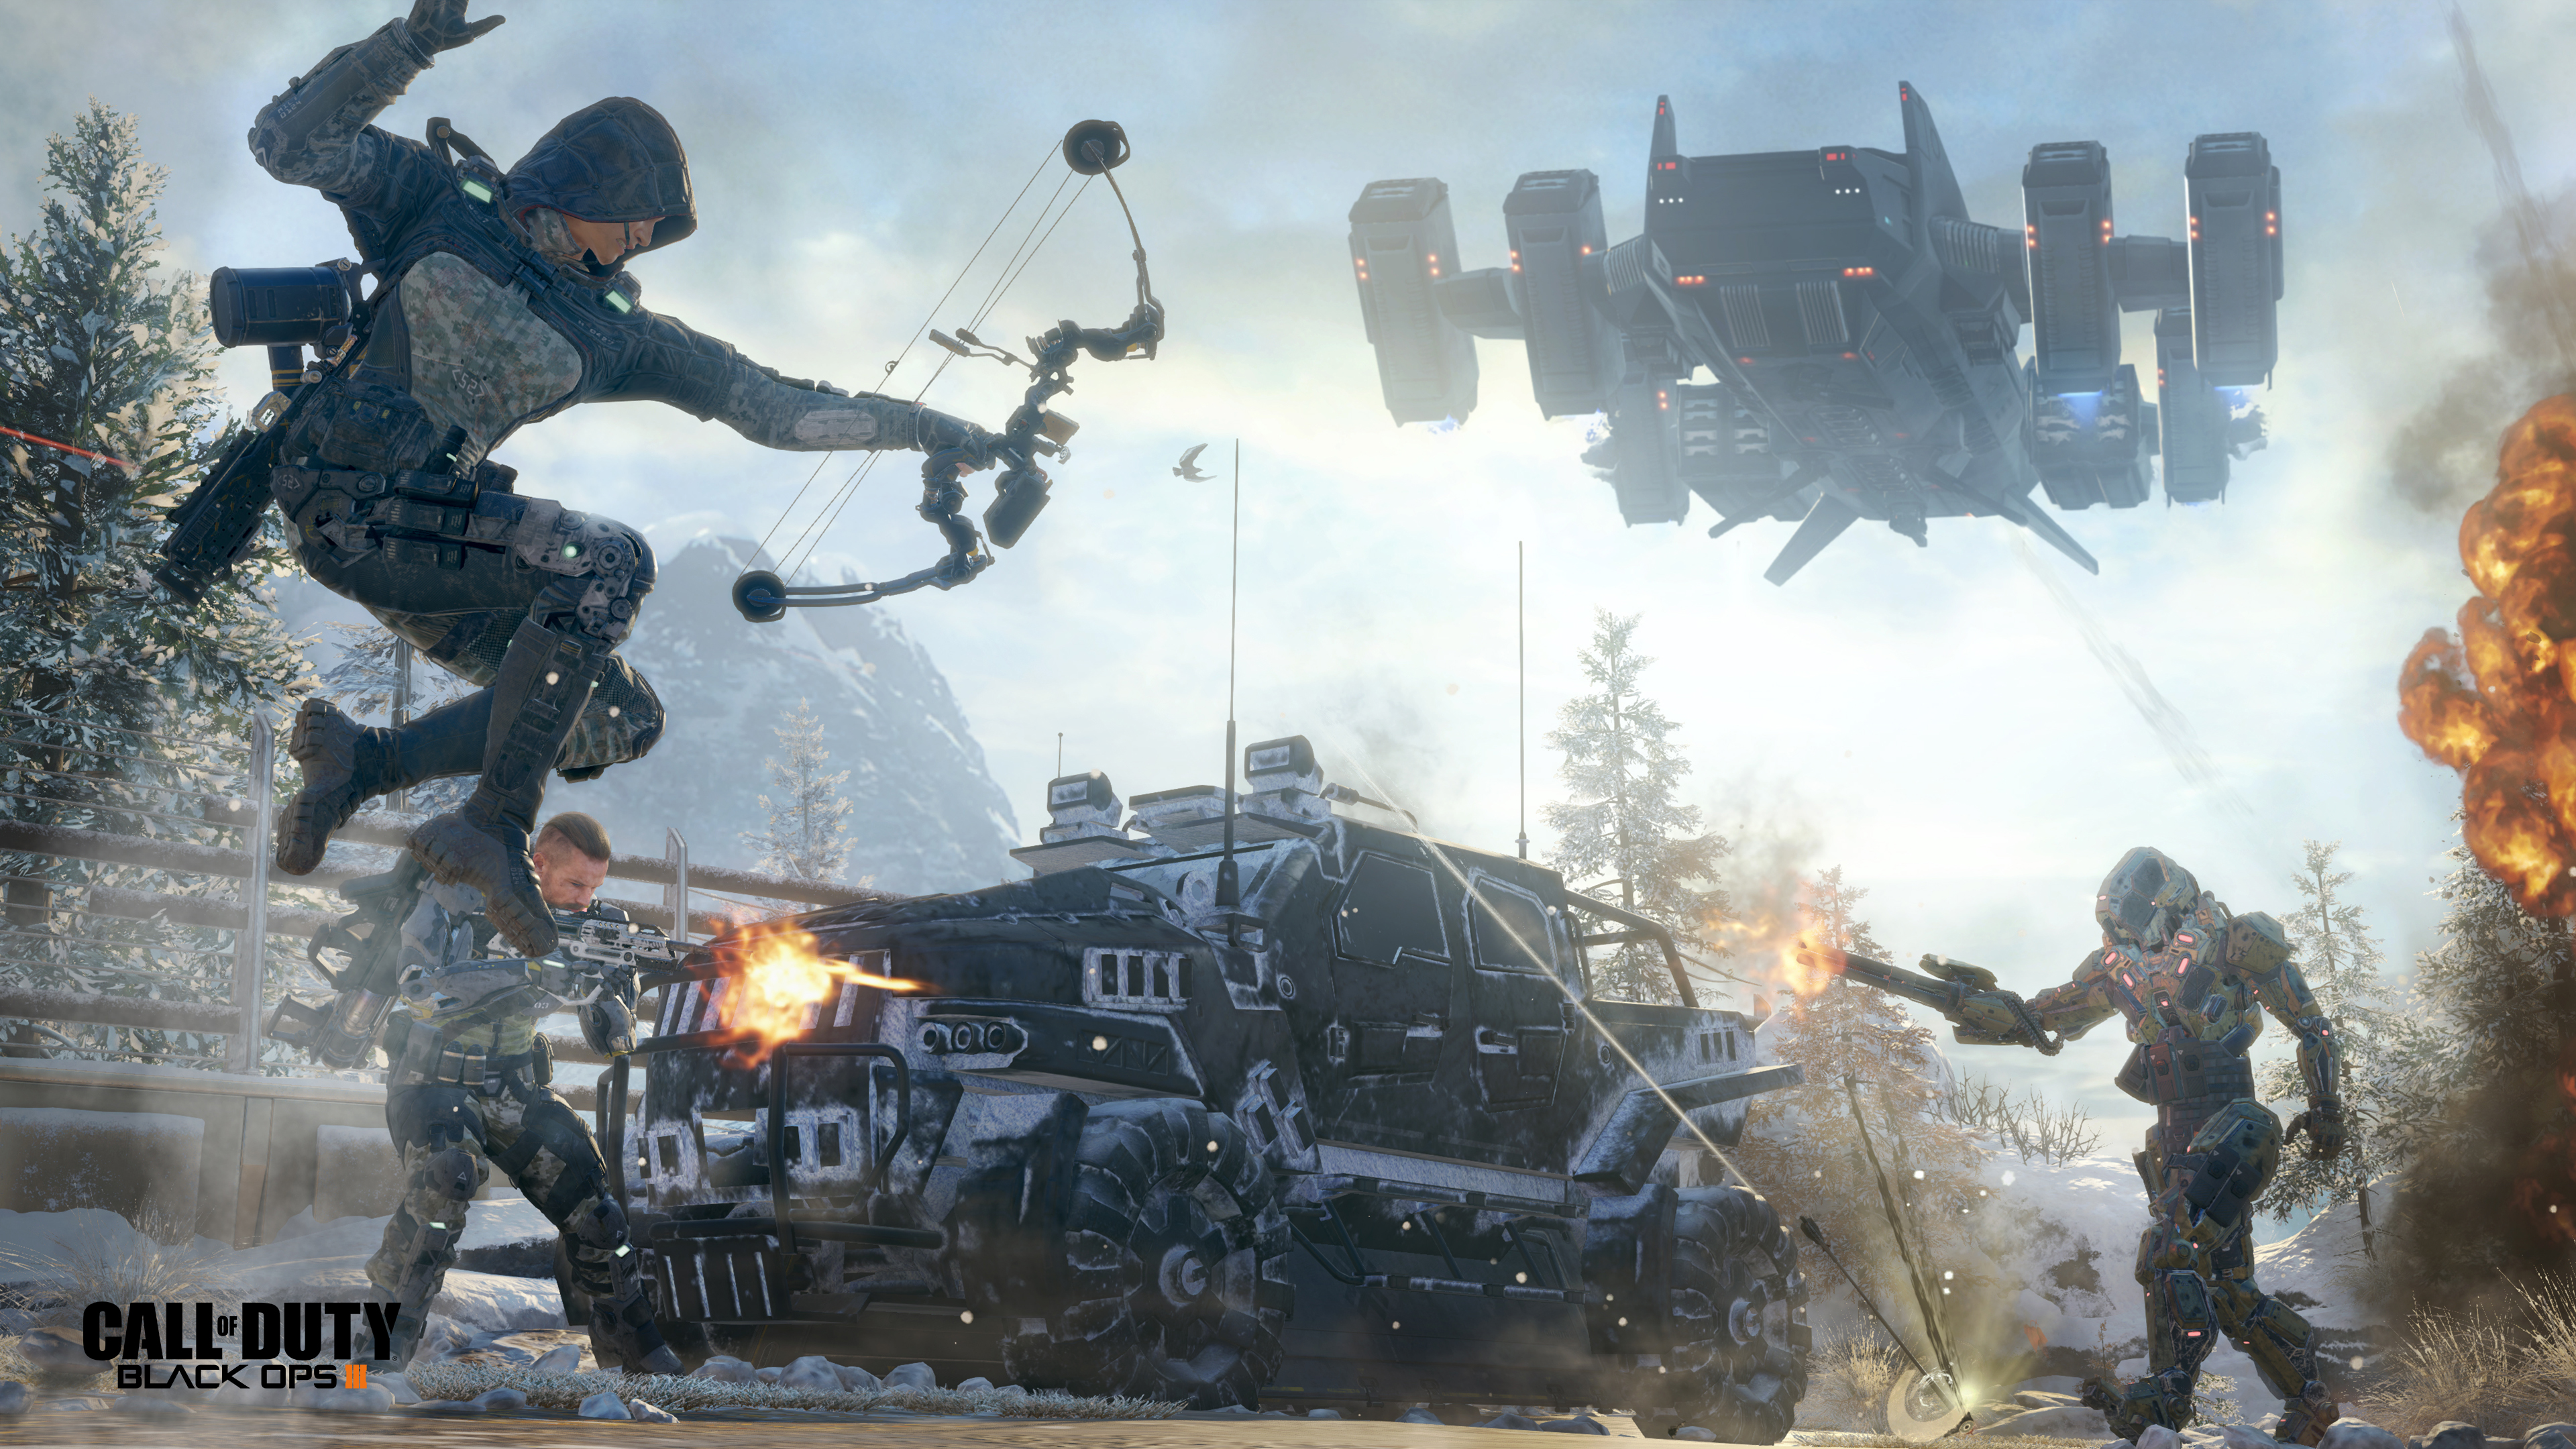 Call of Duty: Black 3 multiplayer relinquishes realism in favour of fun | Ars